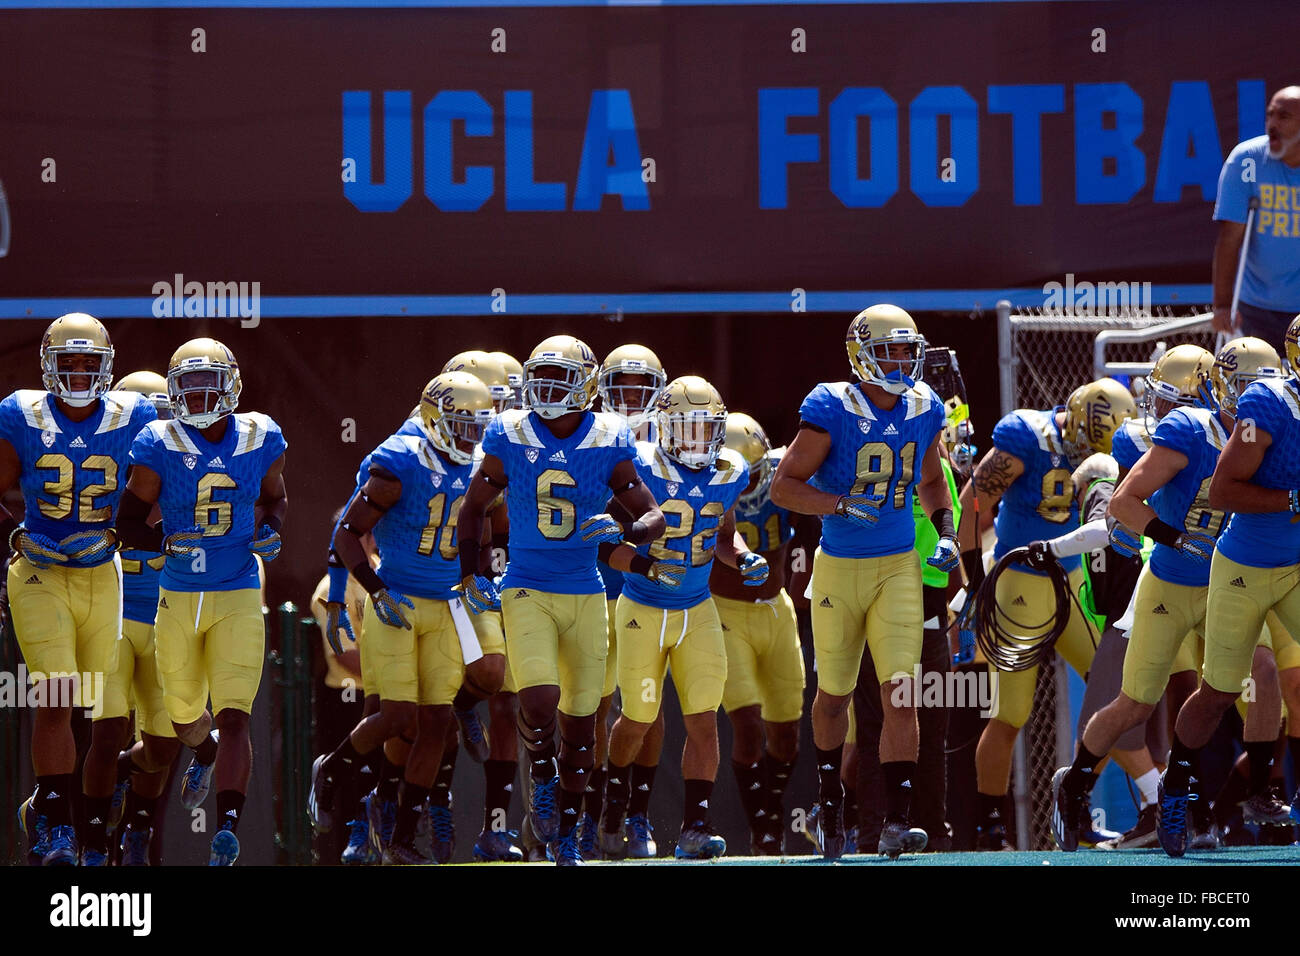 The UCLA Bruins football team enters the field before the game against the Virginia Cavaliers at the Rose Bowl on September 5, Stock Photo